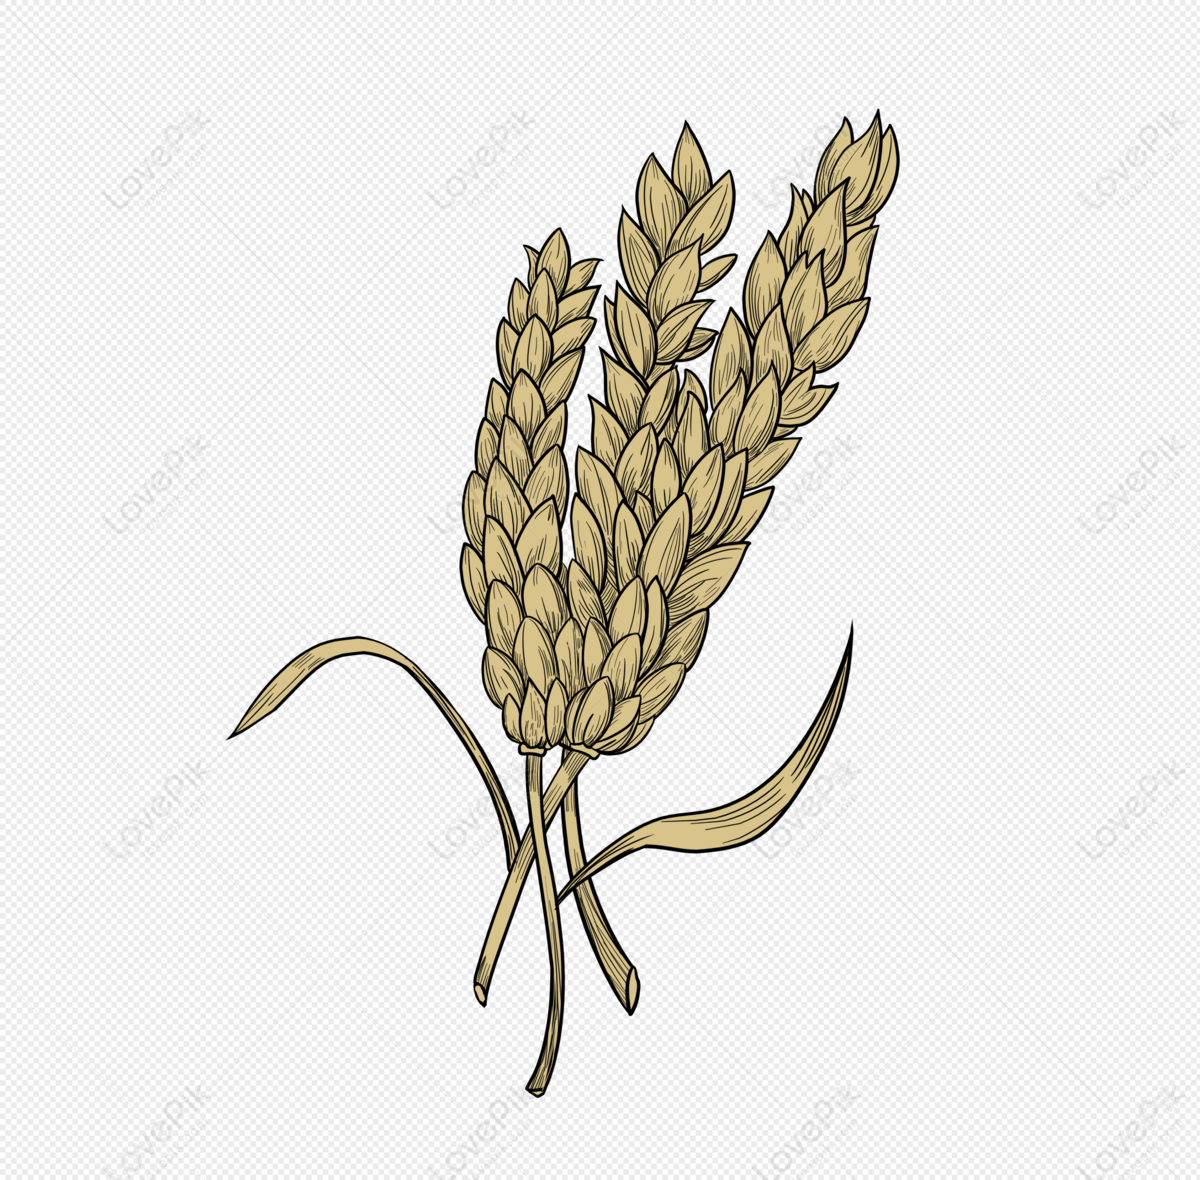 How to Draw Wheat Plant Botany Bsc 1st year Project - YouTube